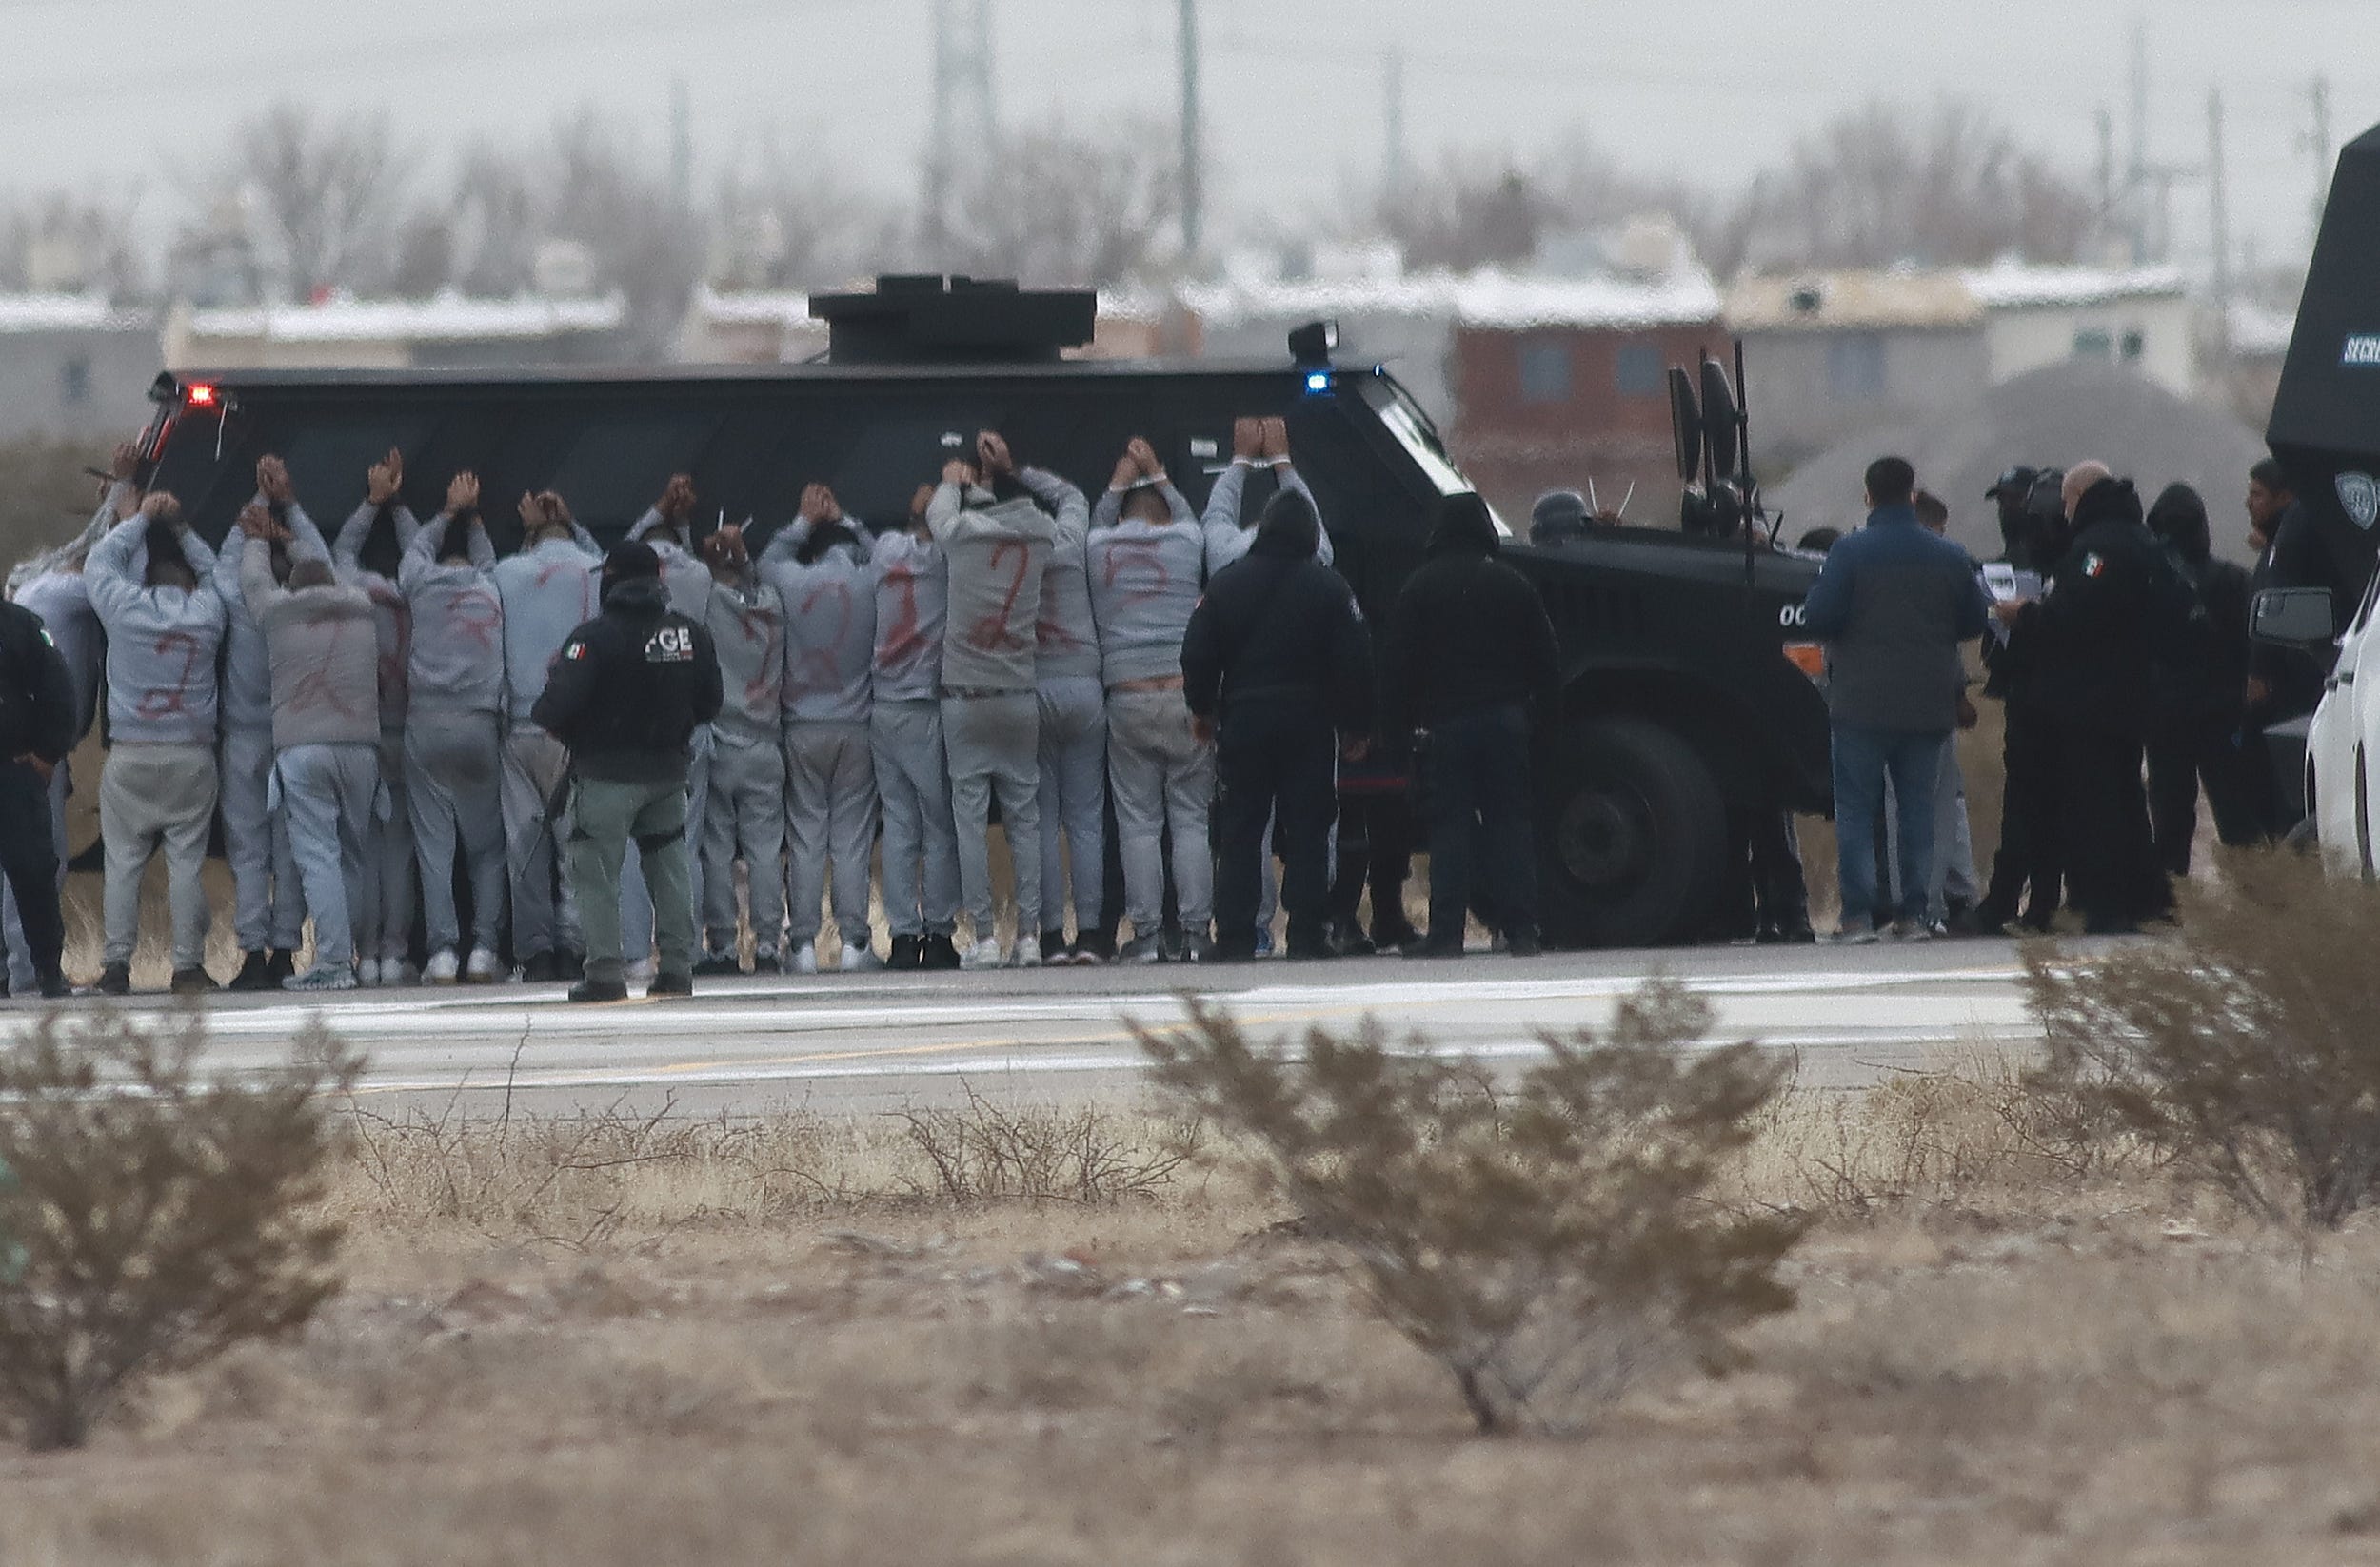 17 dead, 'VIP' cells discovered as gang leader, dozens escape in Mexico prison breakout